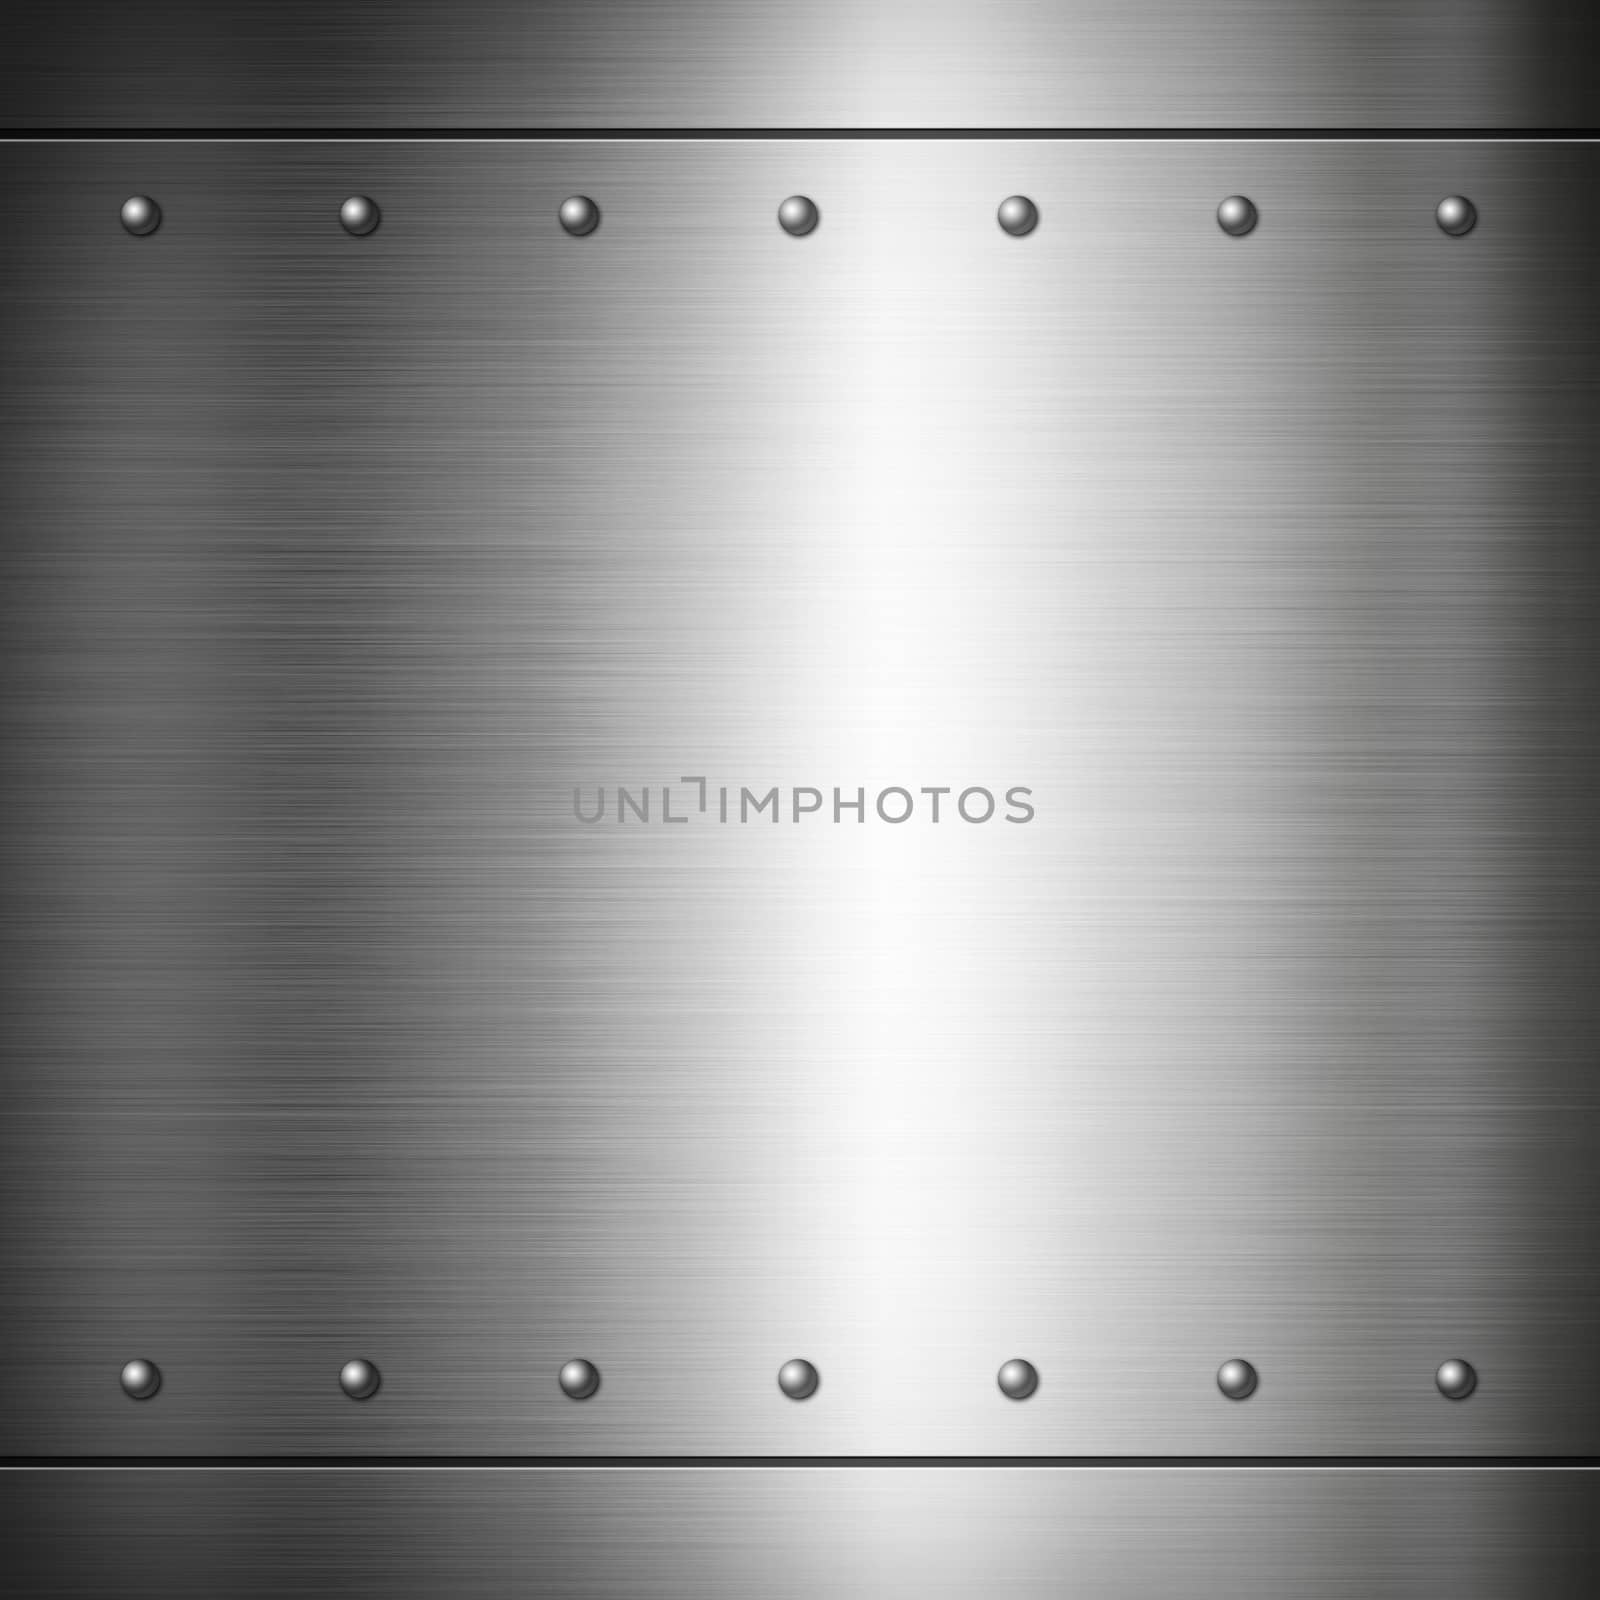 Steel riveted brushed plate background texture. Metal frame background